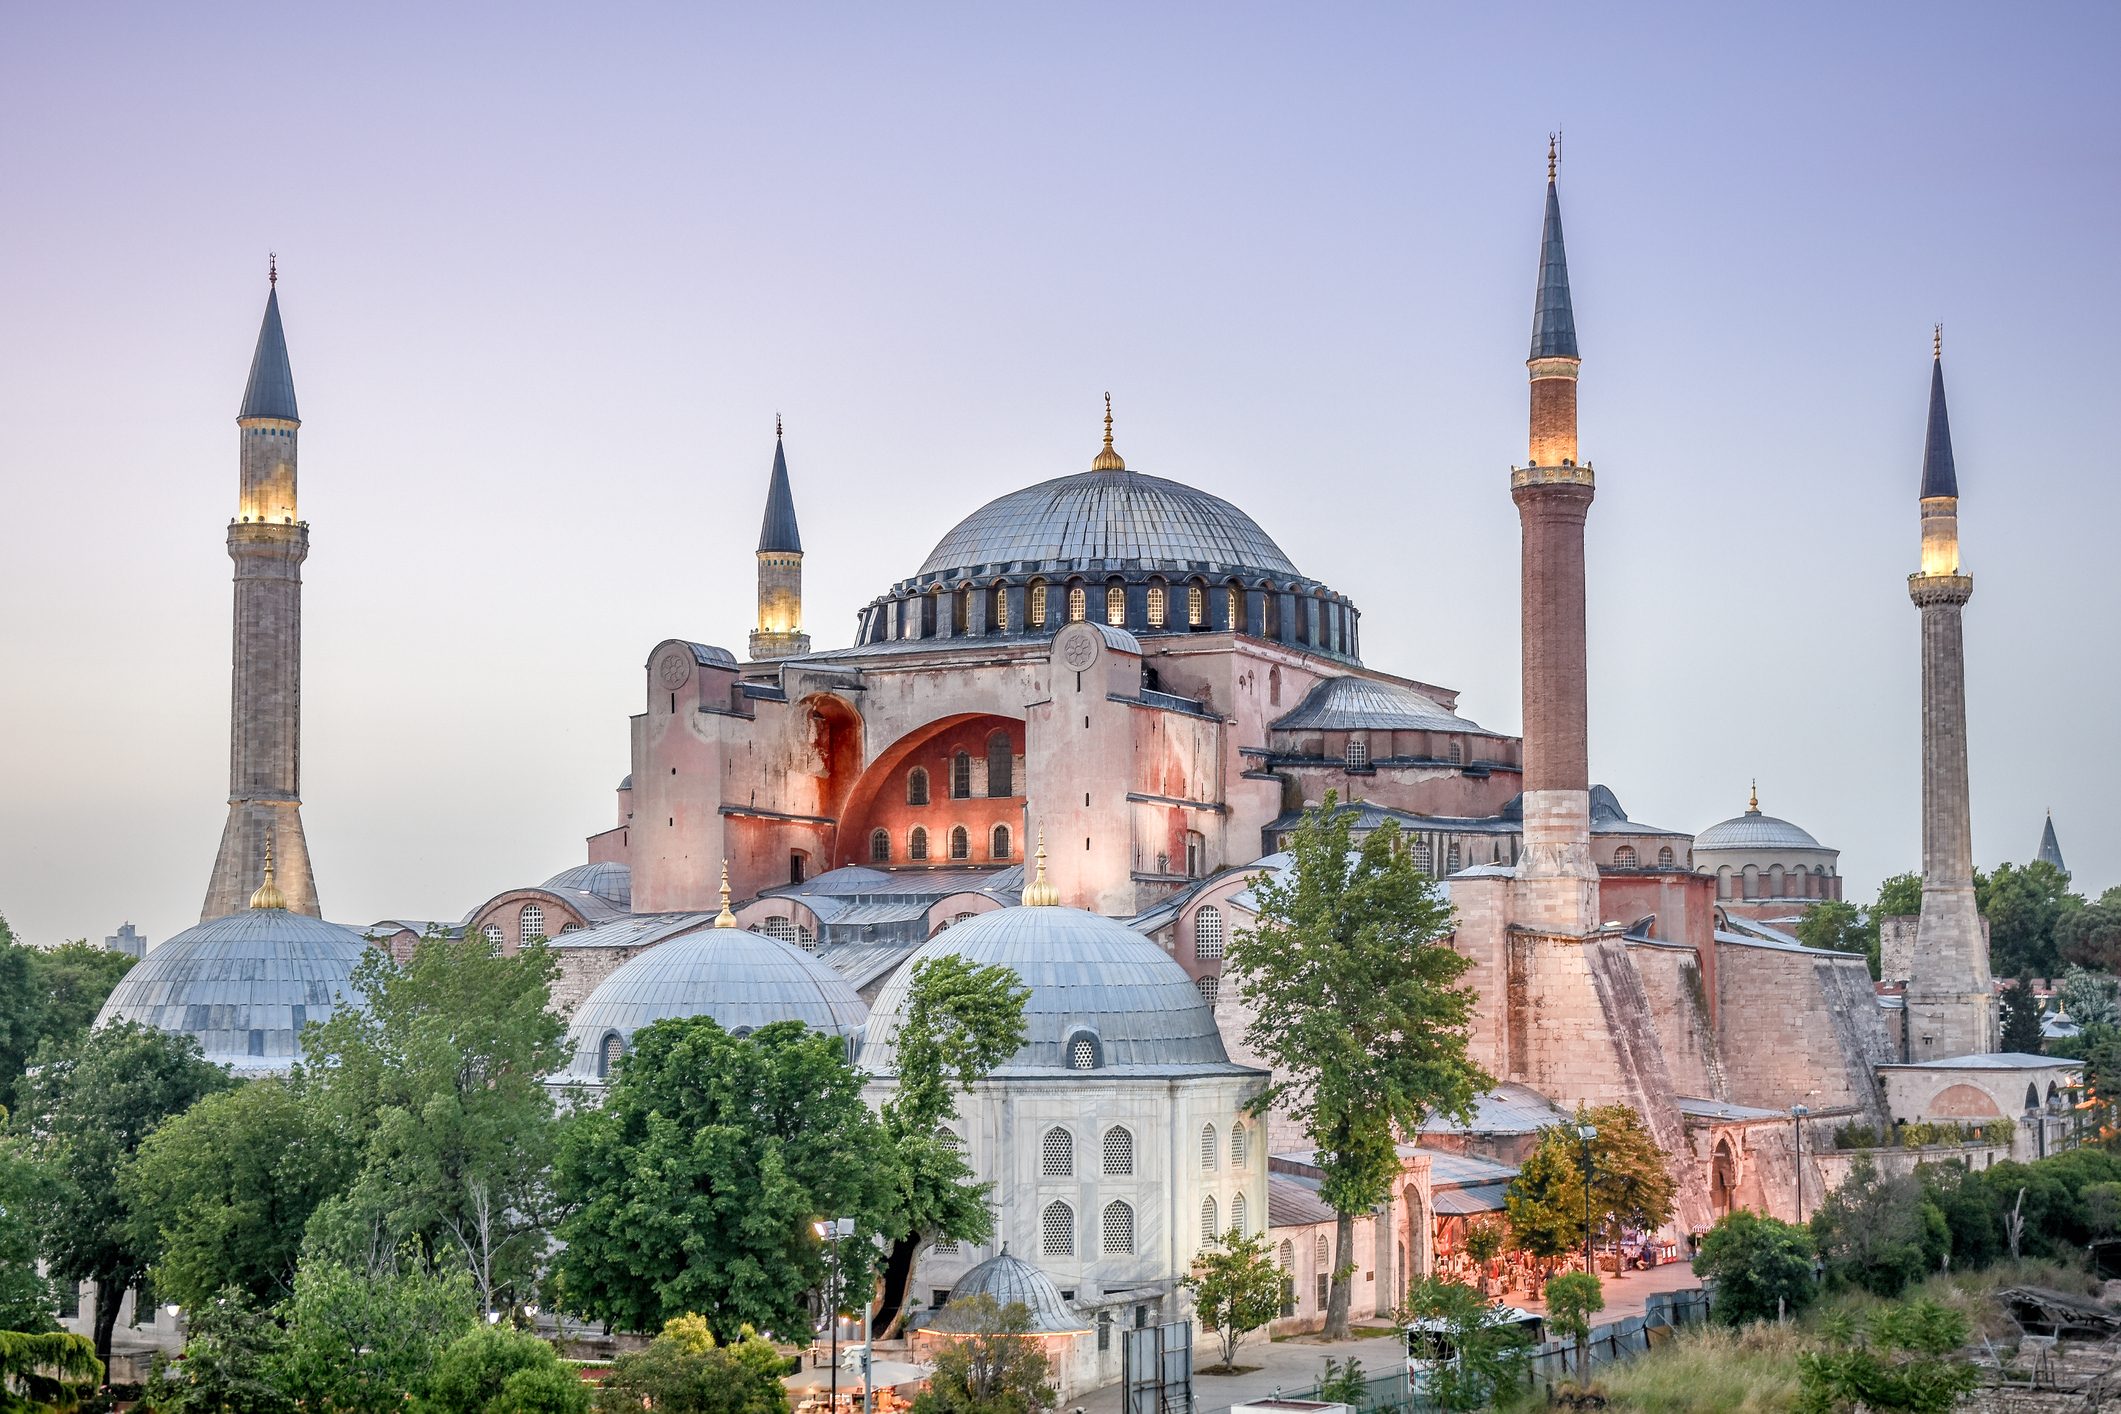 <p class=""><strong>Best for: </strong>Activities</p> <p>Coming in at No. 1 in InsureMyTrip's list of trips for seniors is Istanbul. "Istanbul's recognition as the best destination for senior citizens highlights its cultural richness with highly rated things to do and high-quality health-care services," says Sarah Webber of InsureMyTrip. Cosmopolitan Istanbul is a cultural and ethnic melting pot, a unique <a href="https://www.rd.com/list/meet-the-only-city-in-the-world-that-straddles-two-continents/" rel="noopener noreferrer">city straddling two continents</a> (Europe and Asia), with Greek, Roman, Byzantine, Ottoman and modern Turkish structures—it's a skyline of domes and minarets made up of mosques, churches and synagogues, palaces, castles and towers—and of course, incredible cultural landmarks, including the Hagia Sophia and Blue Mosque.</p> <p>The Turkish city scored highly across many of the metrics, particularly for its quality of things to do (a rating of 4.63 out of 5), health care and ease of walking.</p> <p class="listicle-page__cta-button-shop"><a class="shop-btn" href="https://www.tripadvisor.com/Hotel_Review-g293974-d654651-Reviews-Sirkeci_Mansion-Istanbul.html">Book a Hotel</a></p>